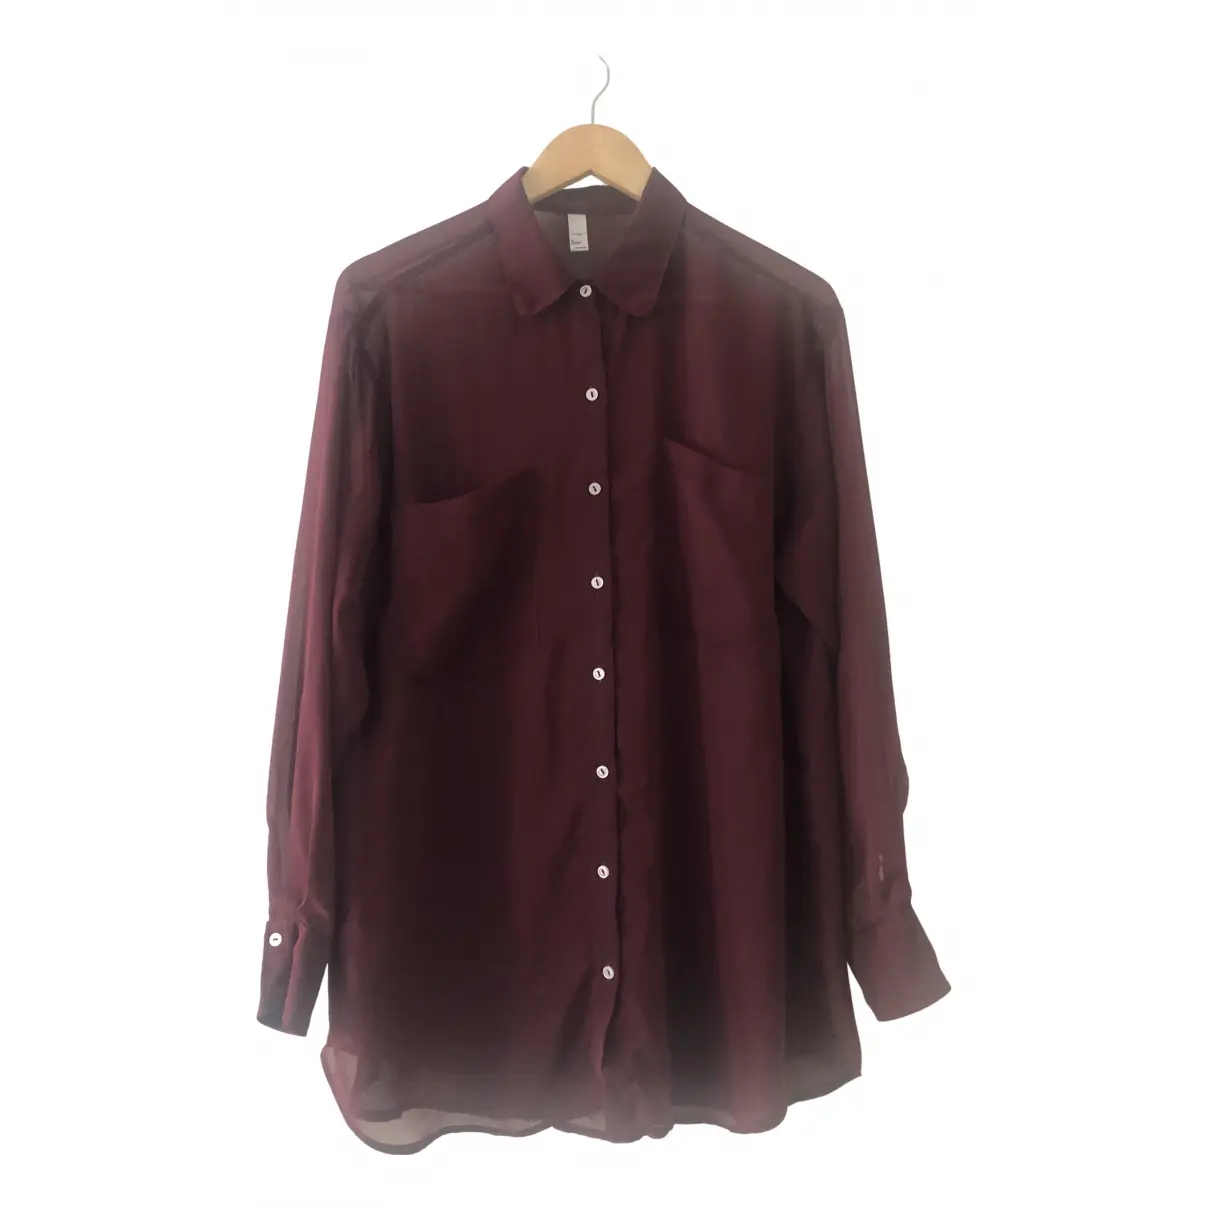 Burgundy Synthetic Top American Apparel